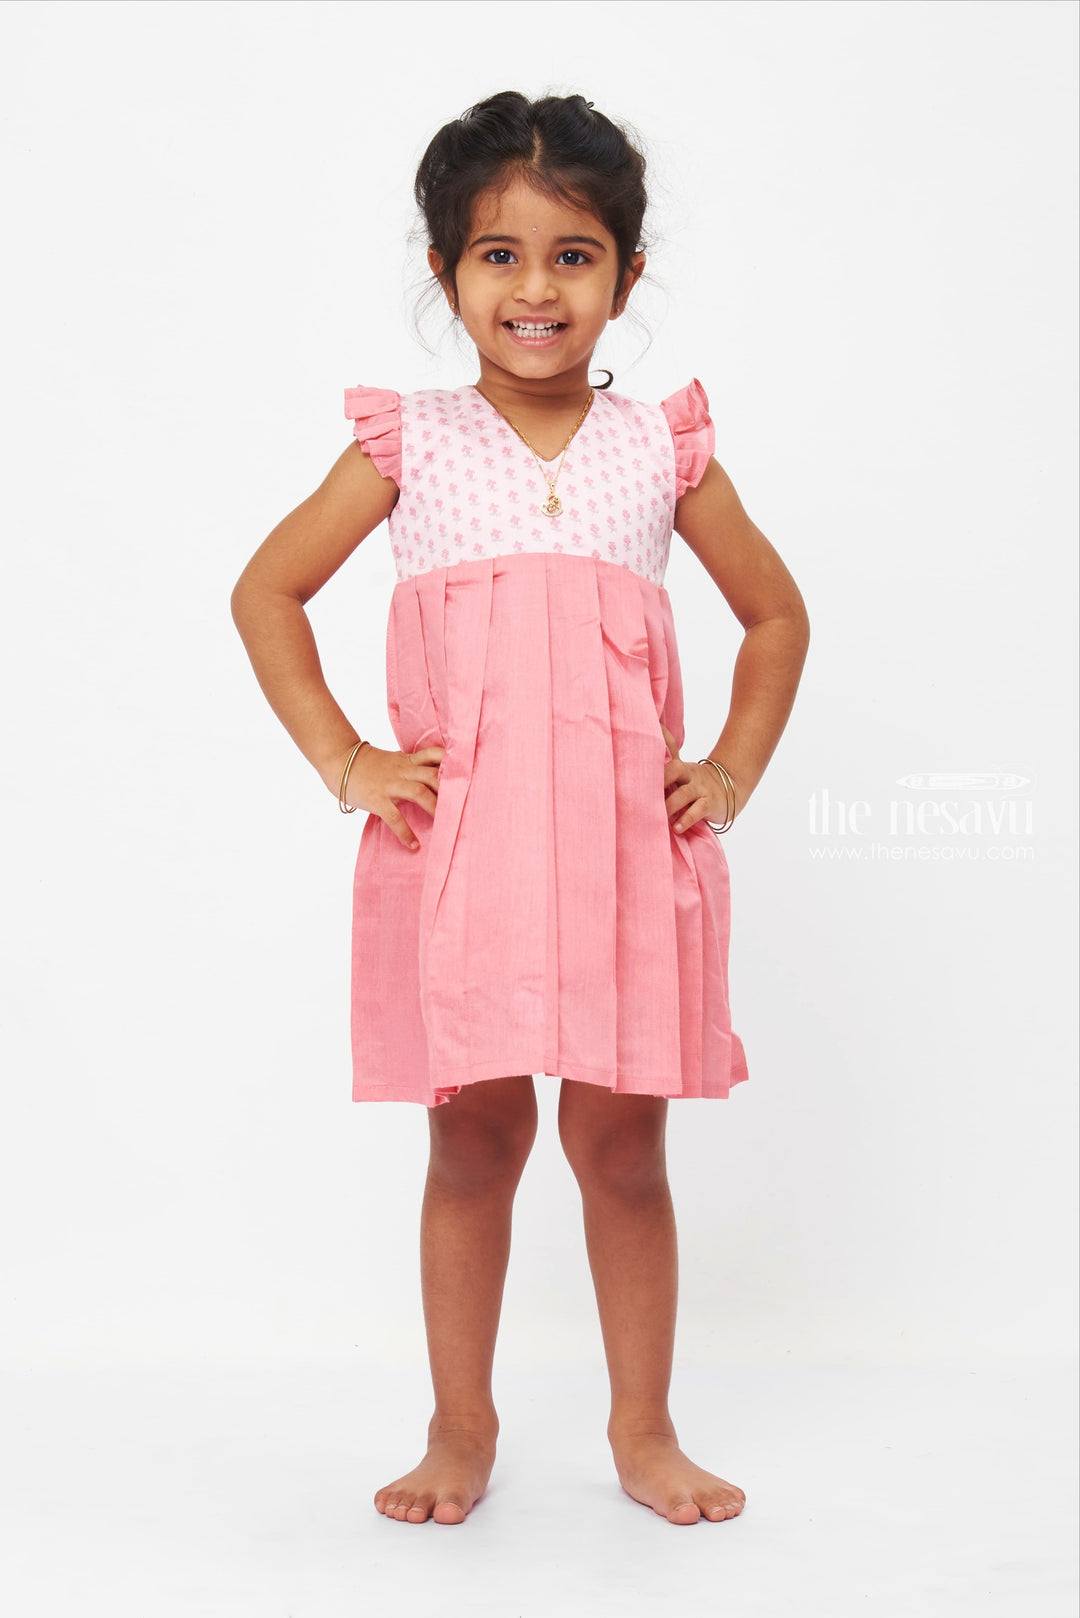 The Nesavu Girls Cotton Frock Coral Pleated Cotton Dress with Floral Printed Yoke for Girls Nesavu 12 (3M) / Pink / Cotton GFC1181A-12 Girls Floral Yoke Pleated Dress | Coral Cotton Frock for Casual Wear | The Nesavu